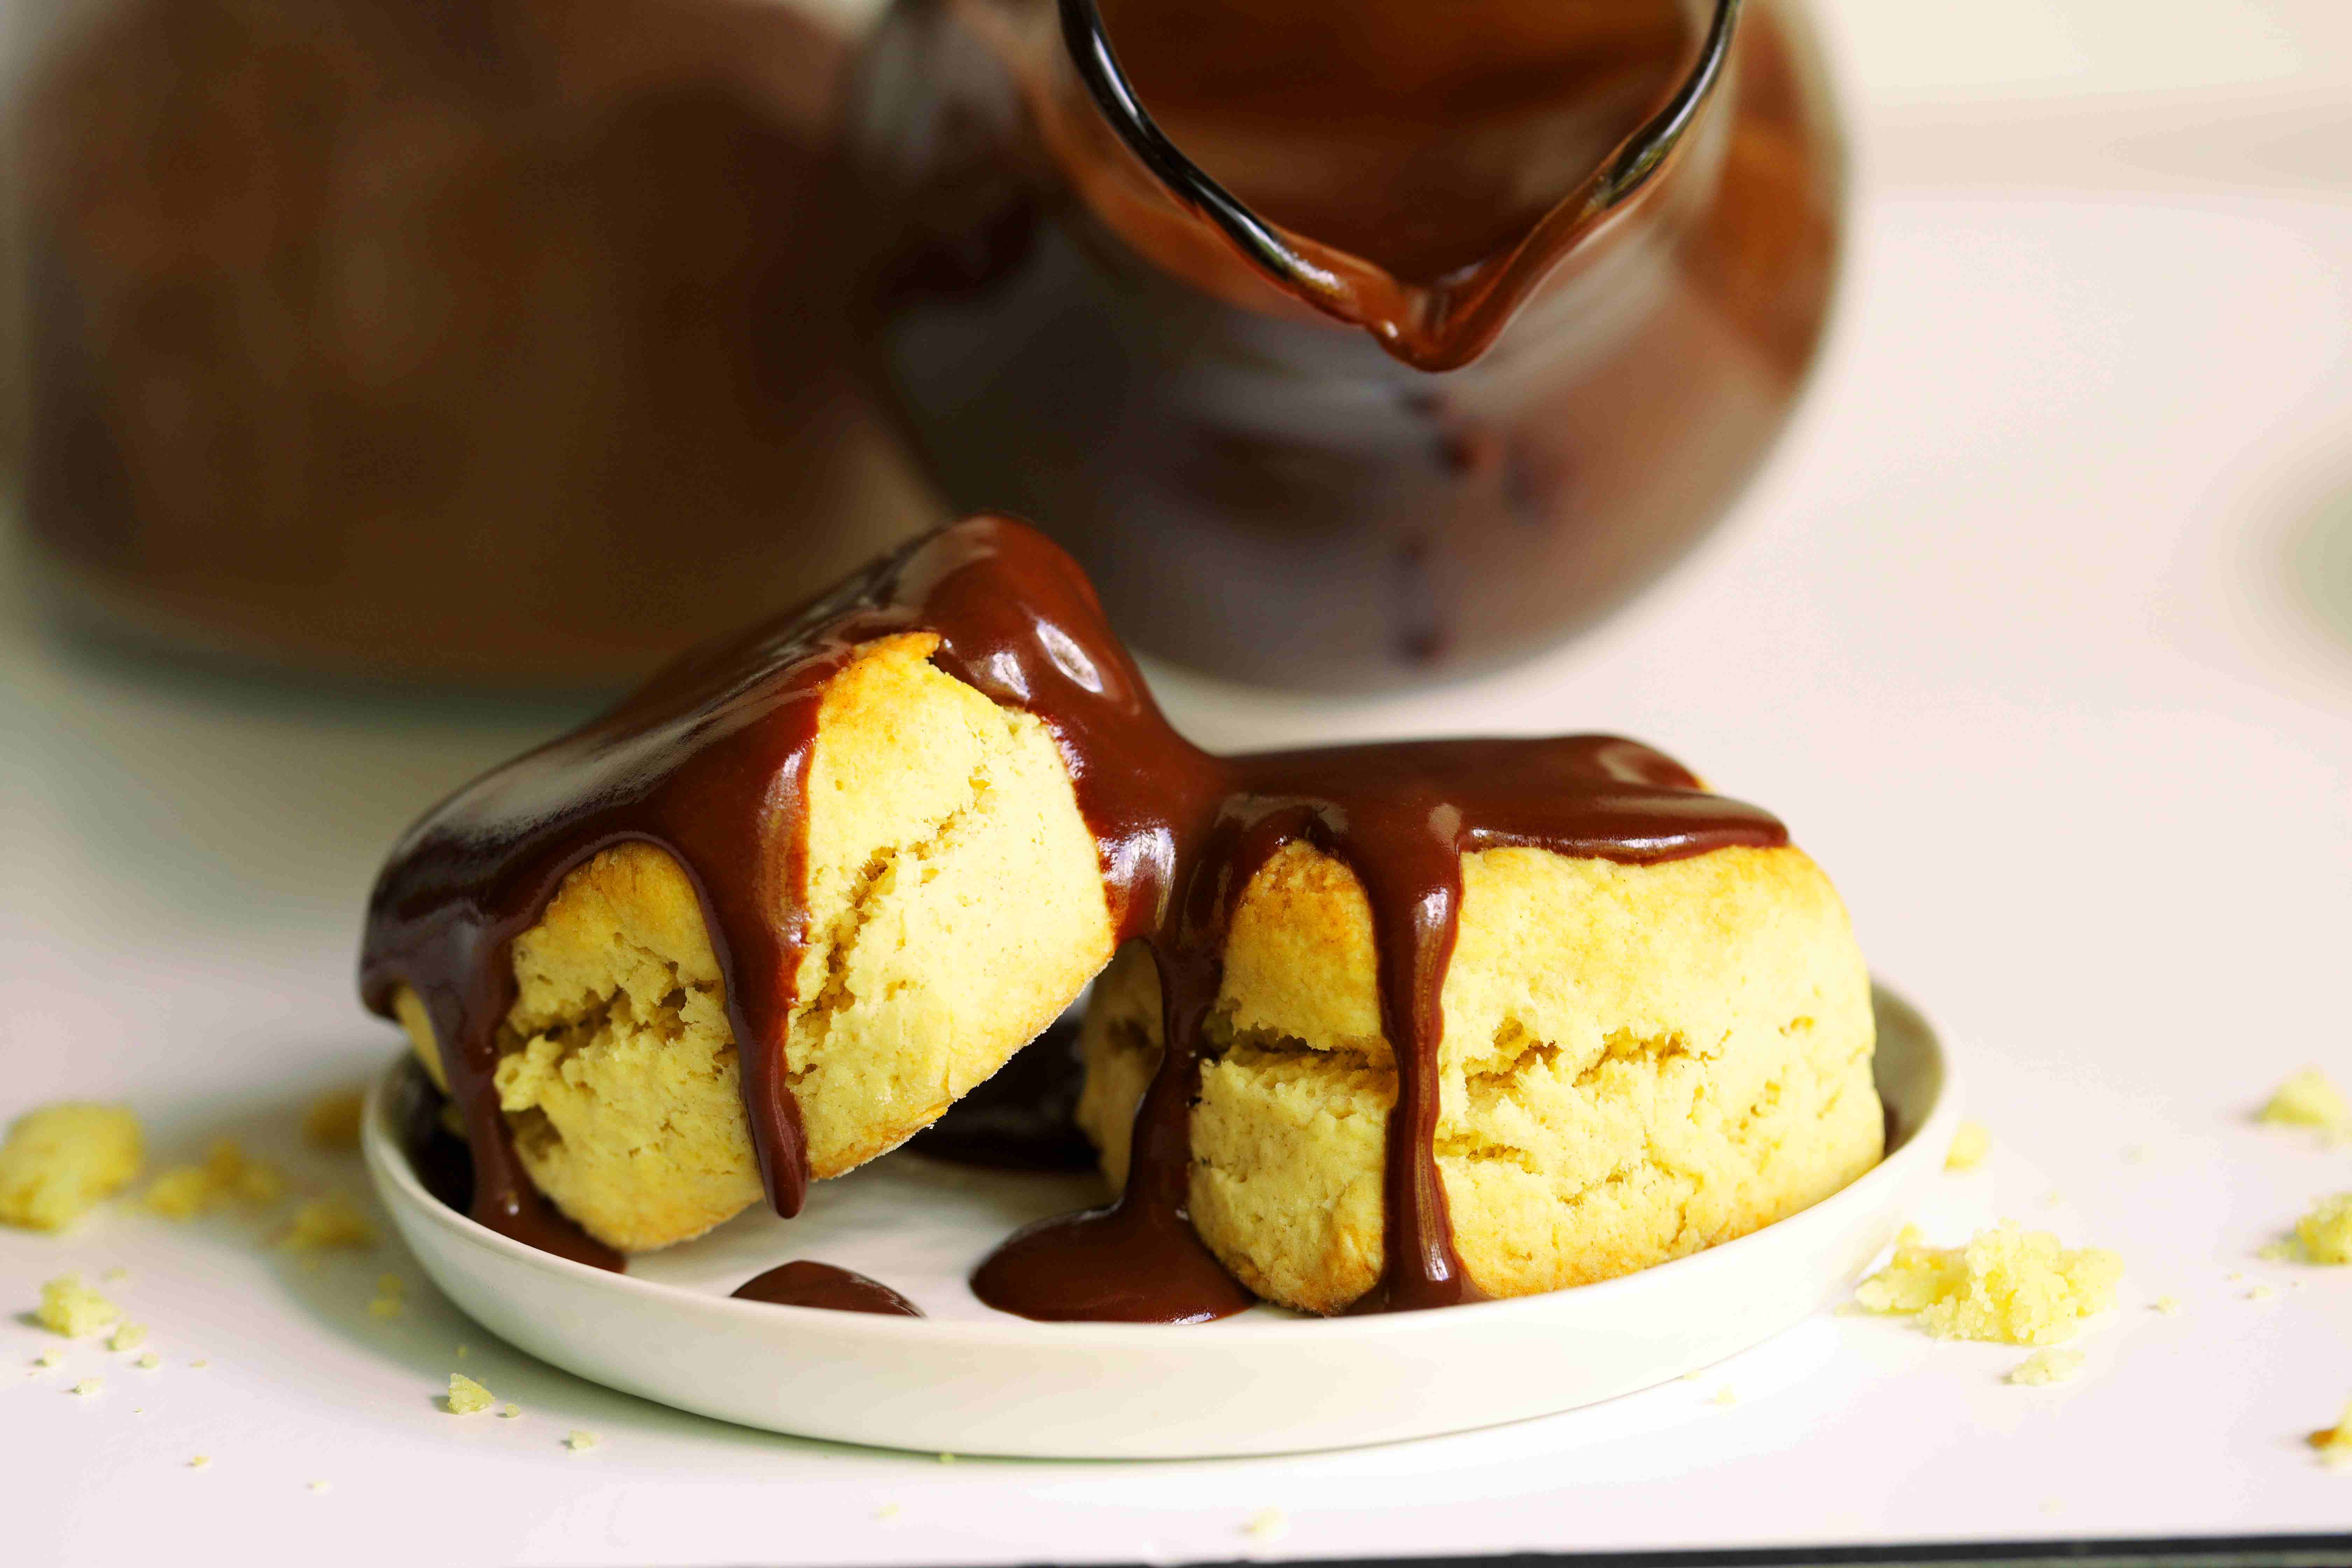 Two biscuits on a white plate drizzled with Chocolate Gravy